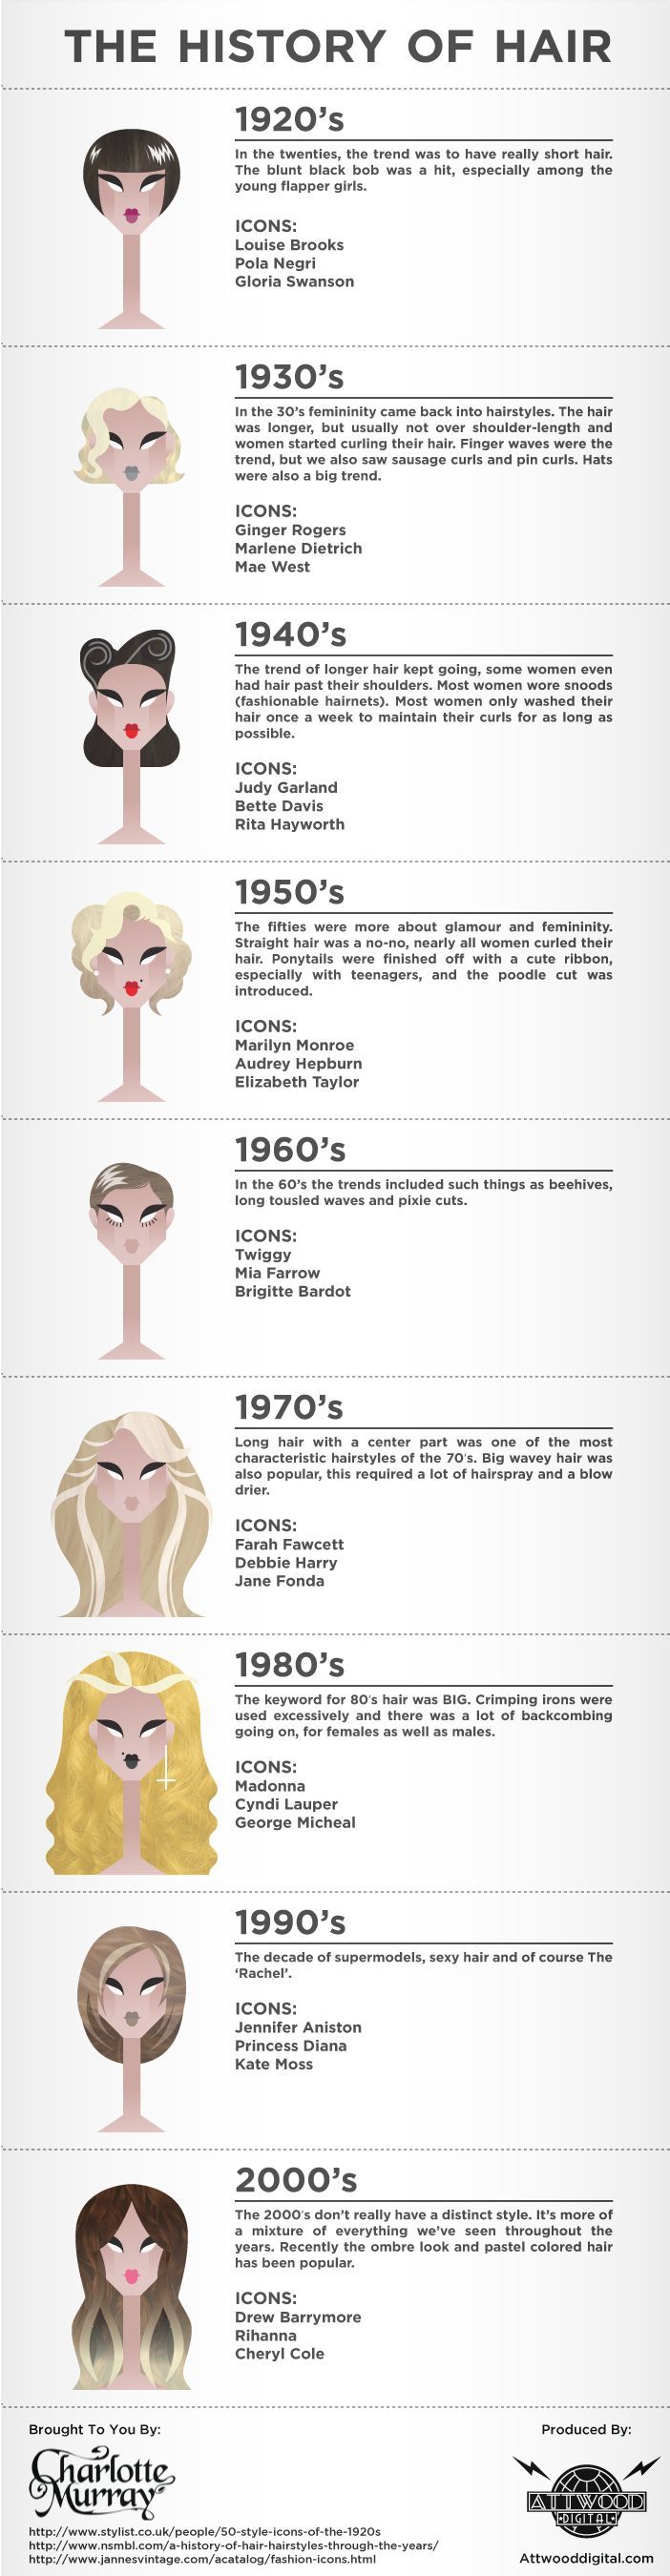 History of Hair Styles in the 20th Century